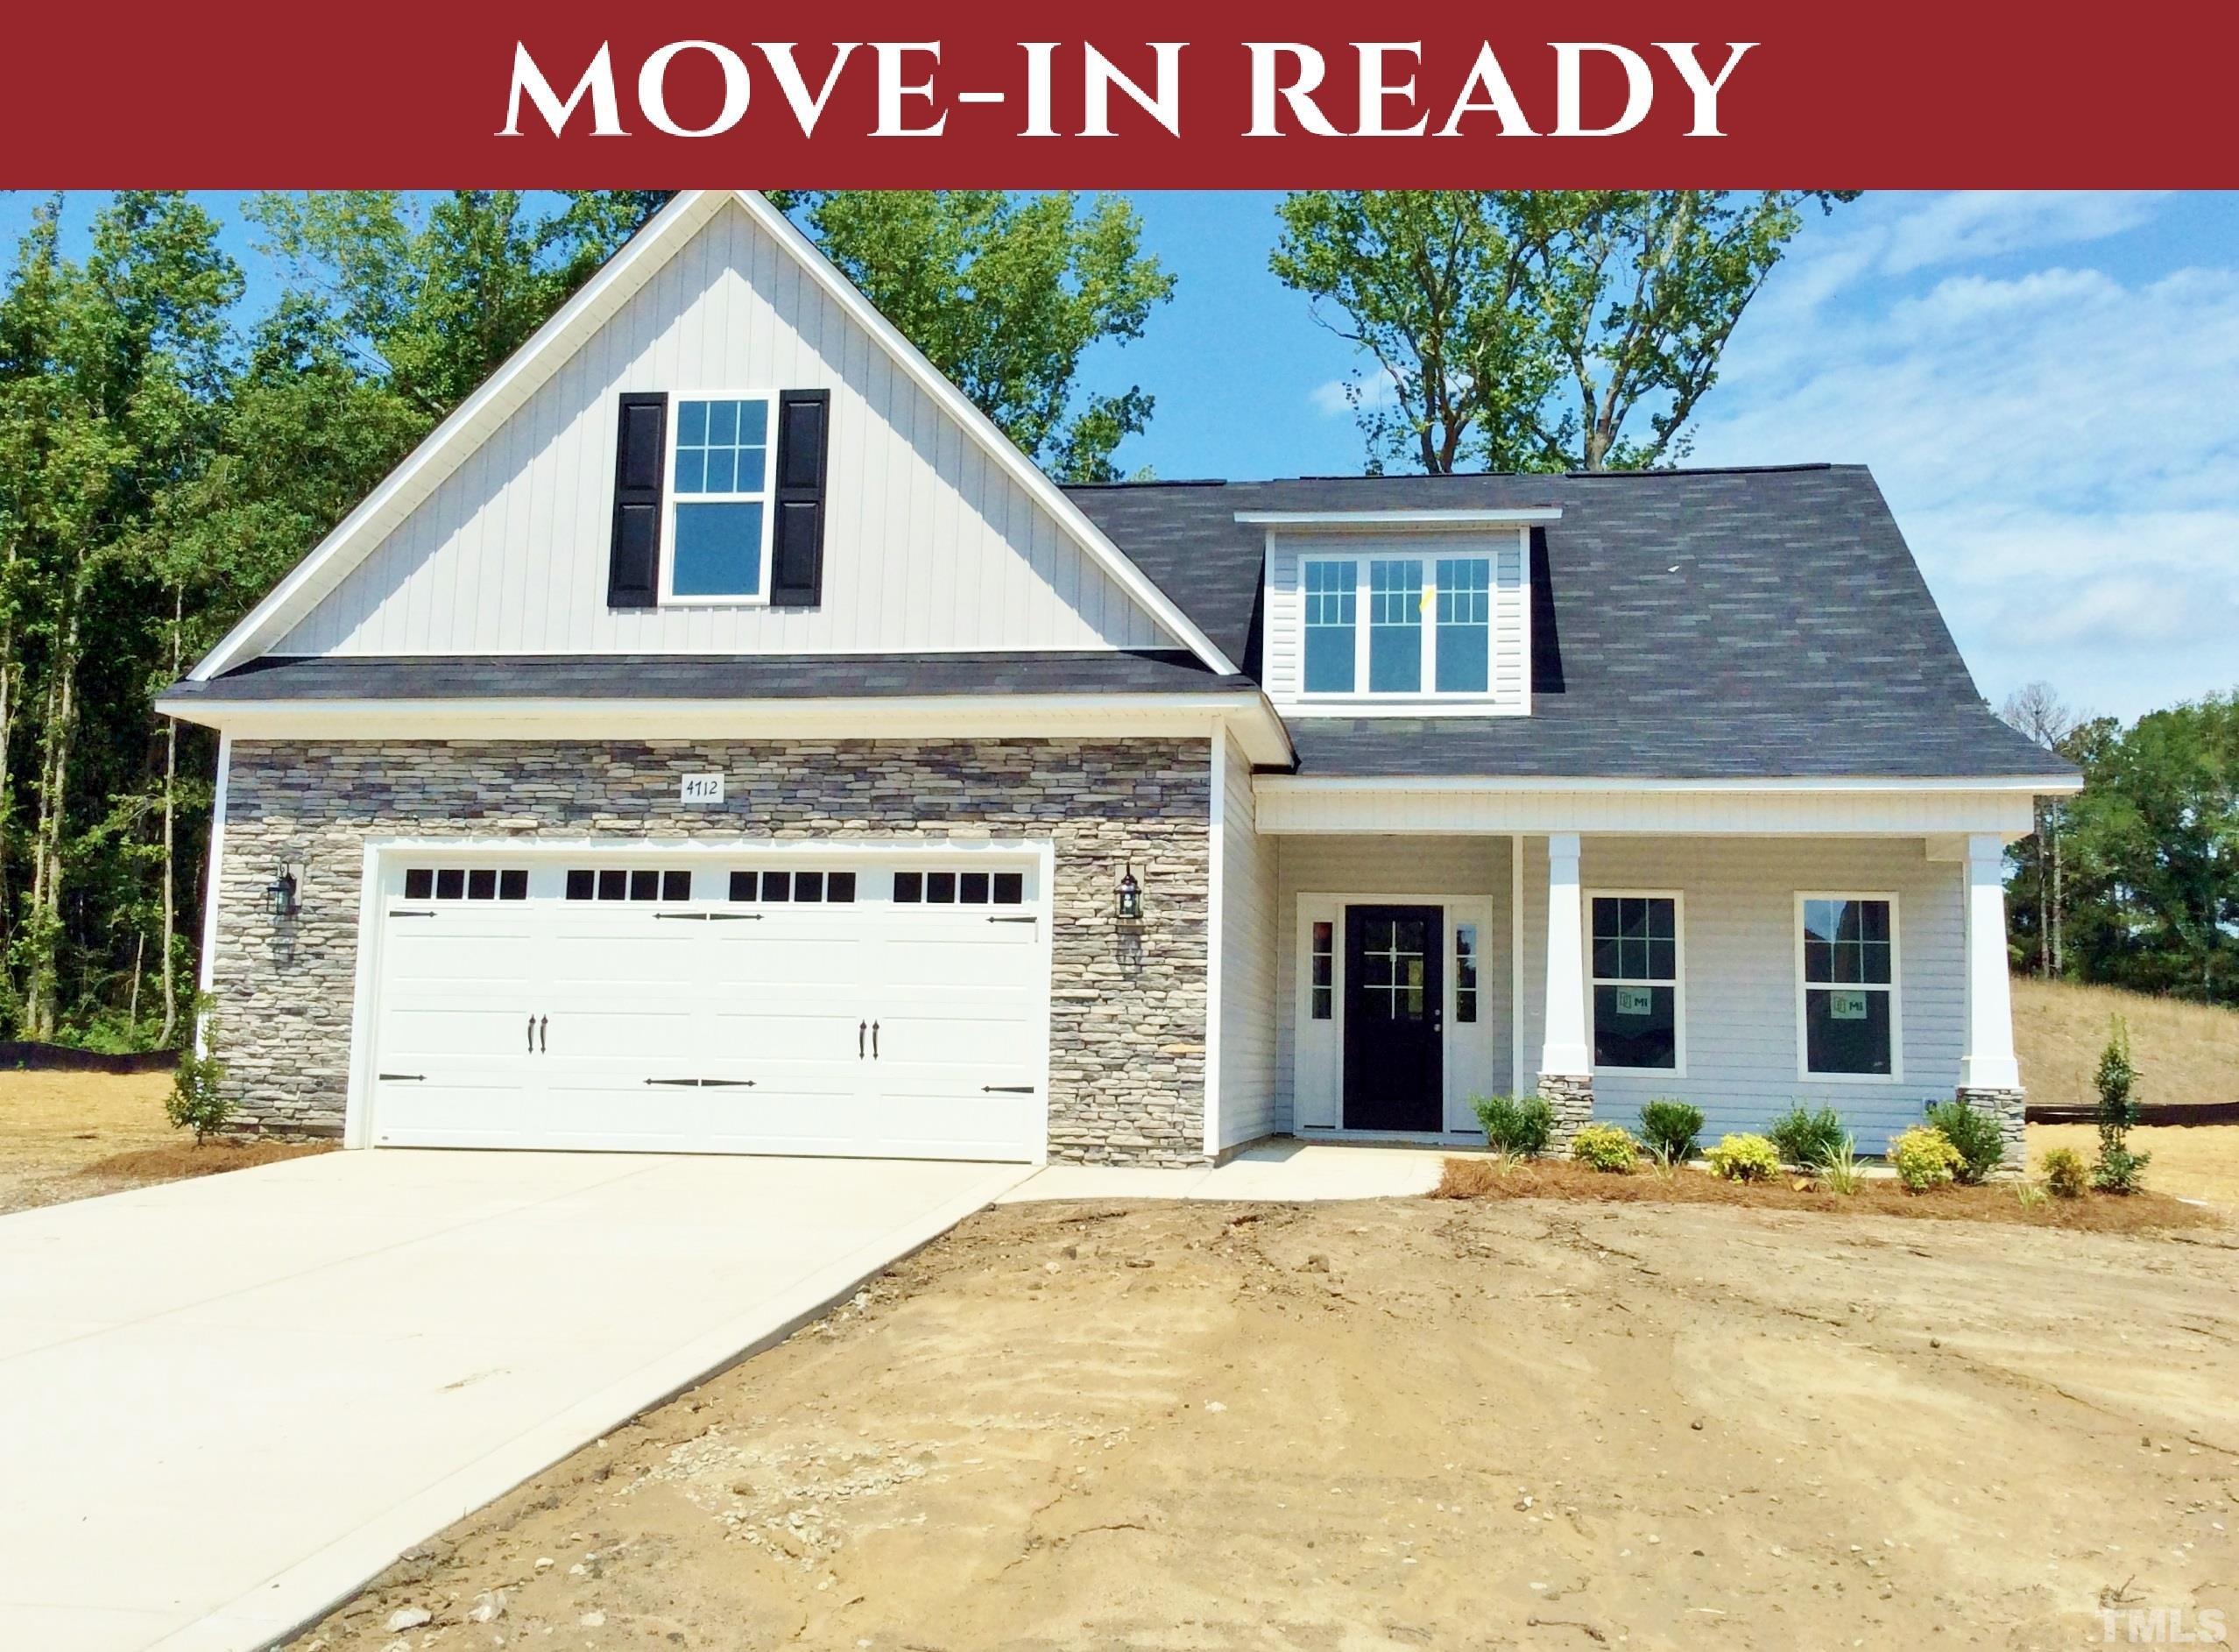 New home for sale in Sheffield Farms North, Hope Mills NC